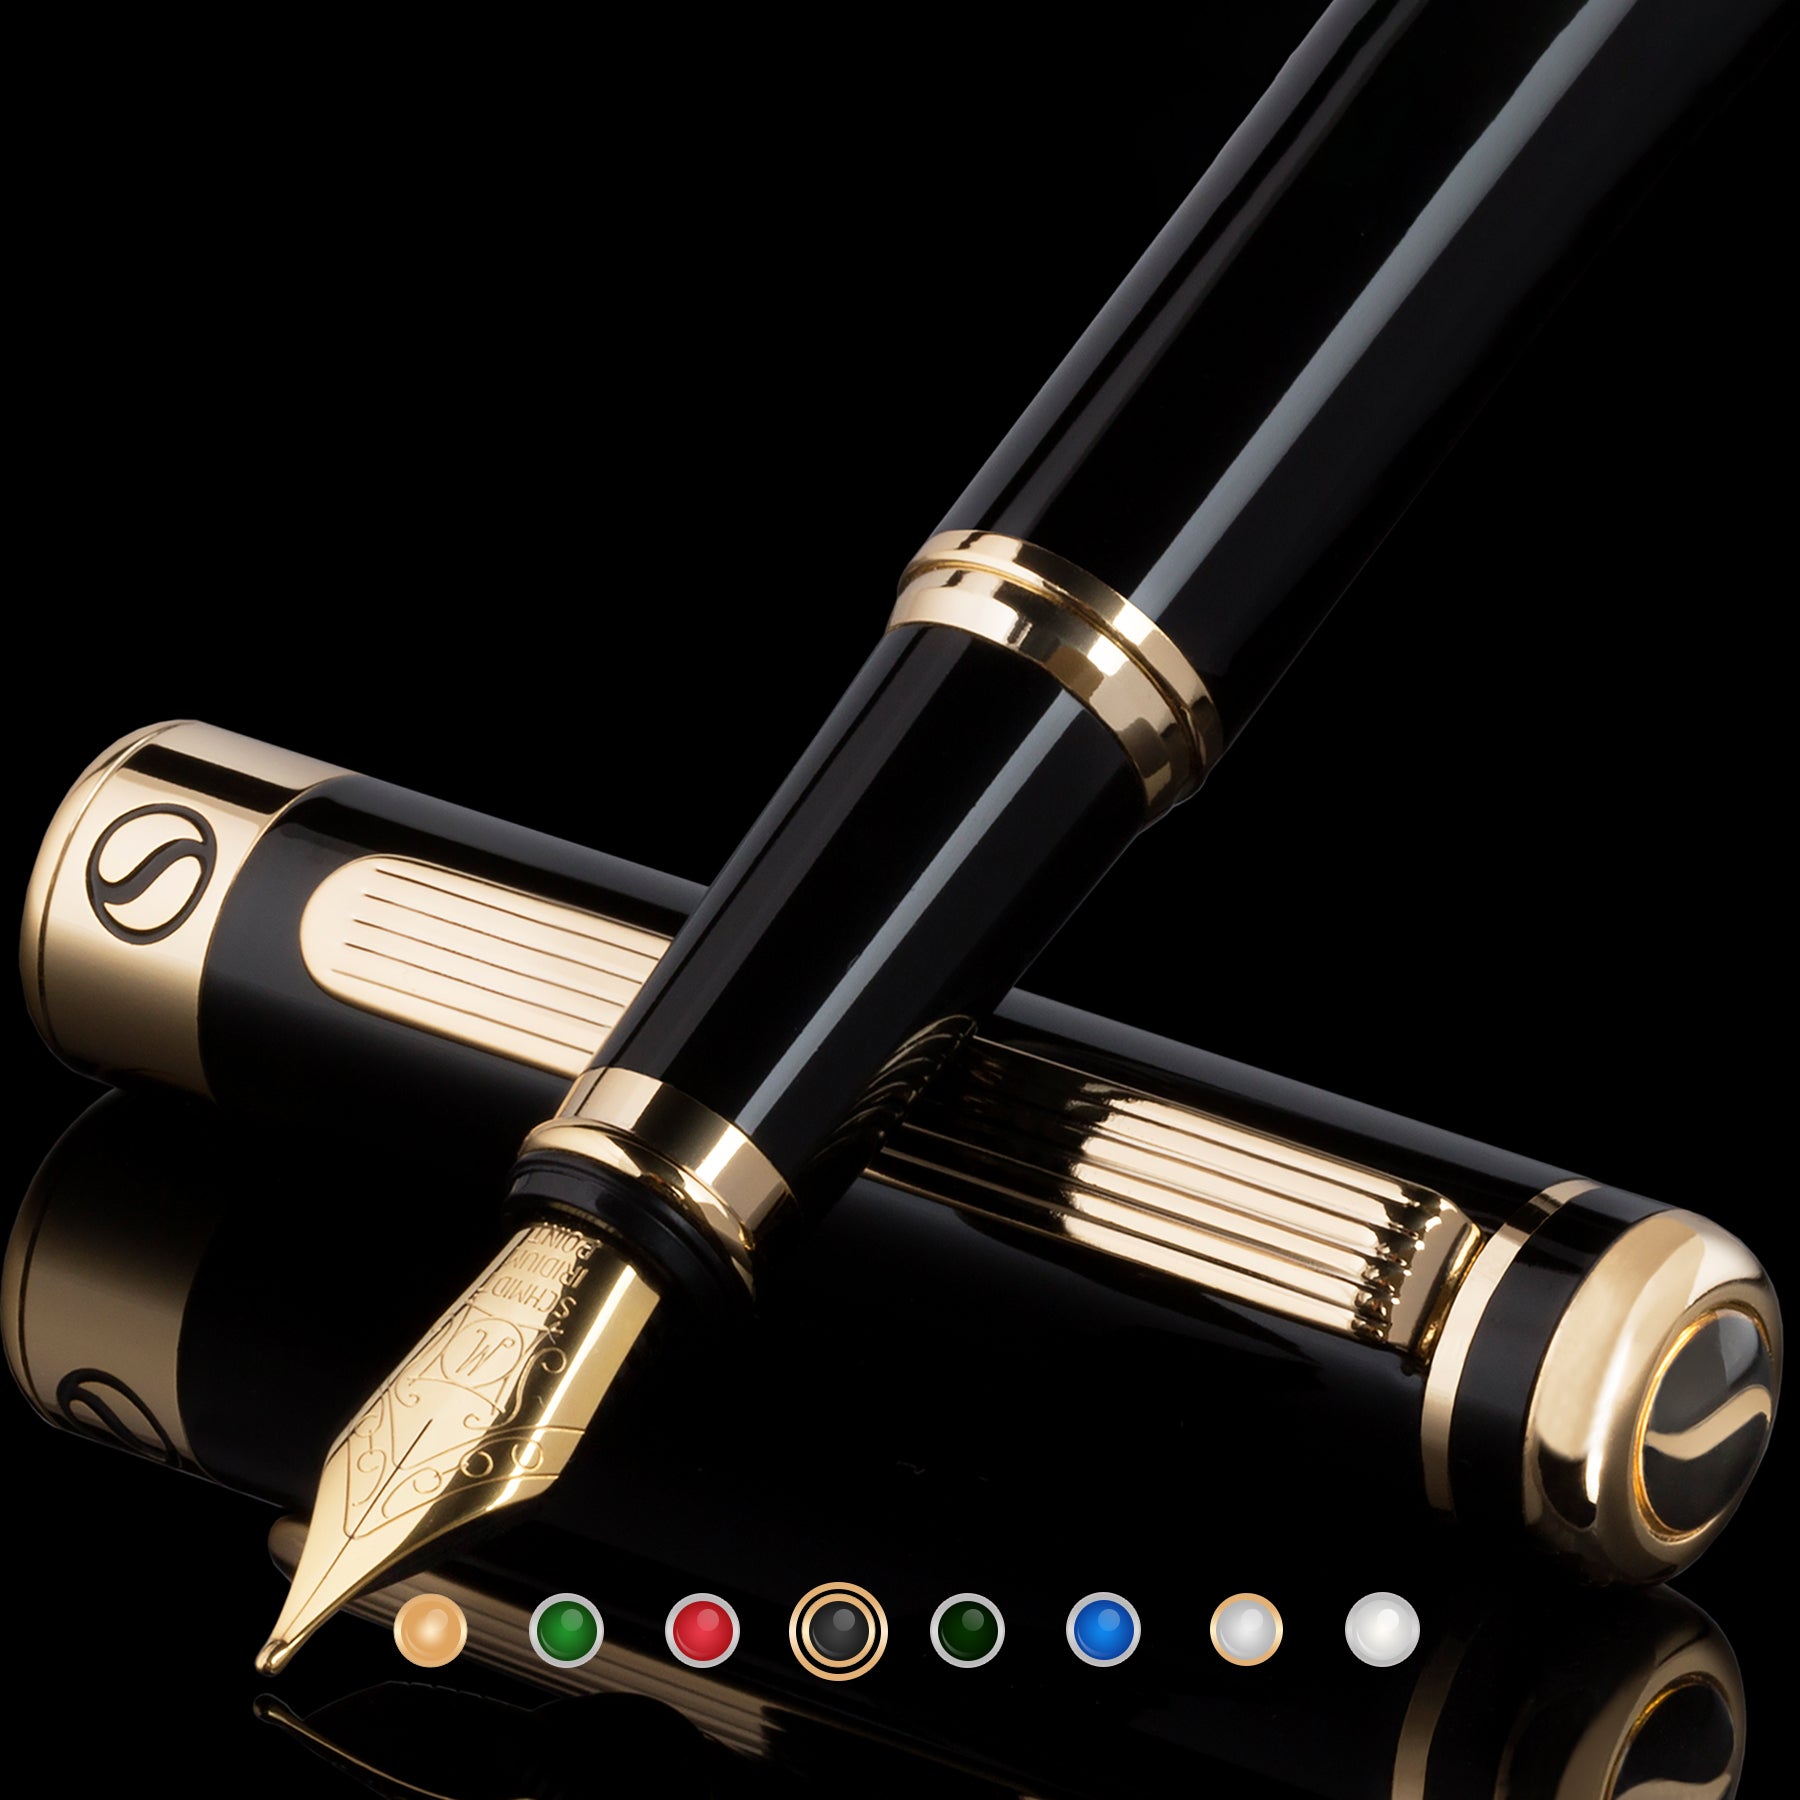 BLADE BLACK Ready-to-Write Fountain Pen by Itoya  BUY a BUCKET and SAVE -  Picture Frames, Photo Albums, Personalized and Engraved Digital Photo Gifts  - SendAFrame